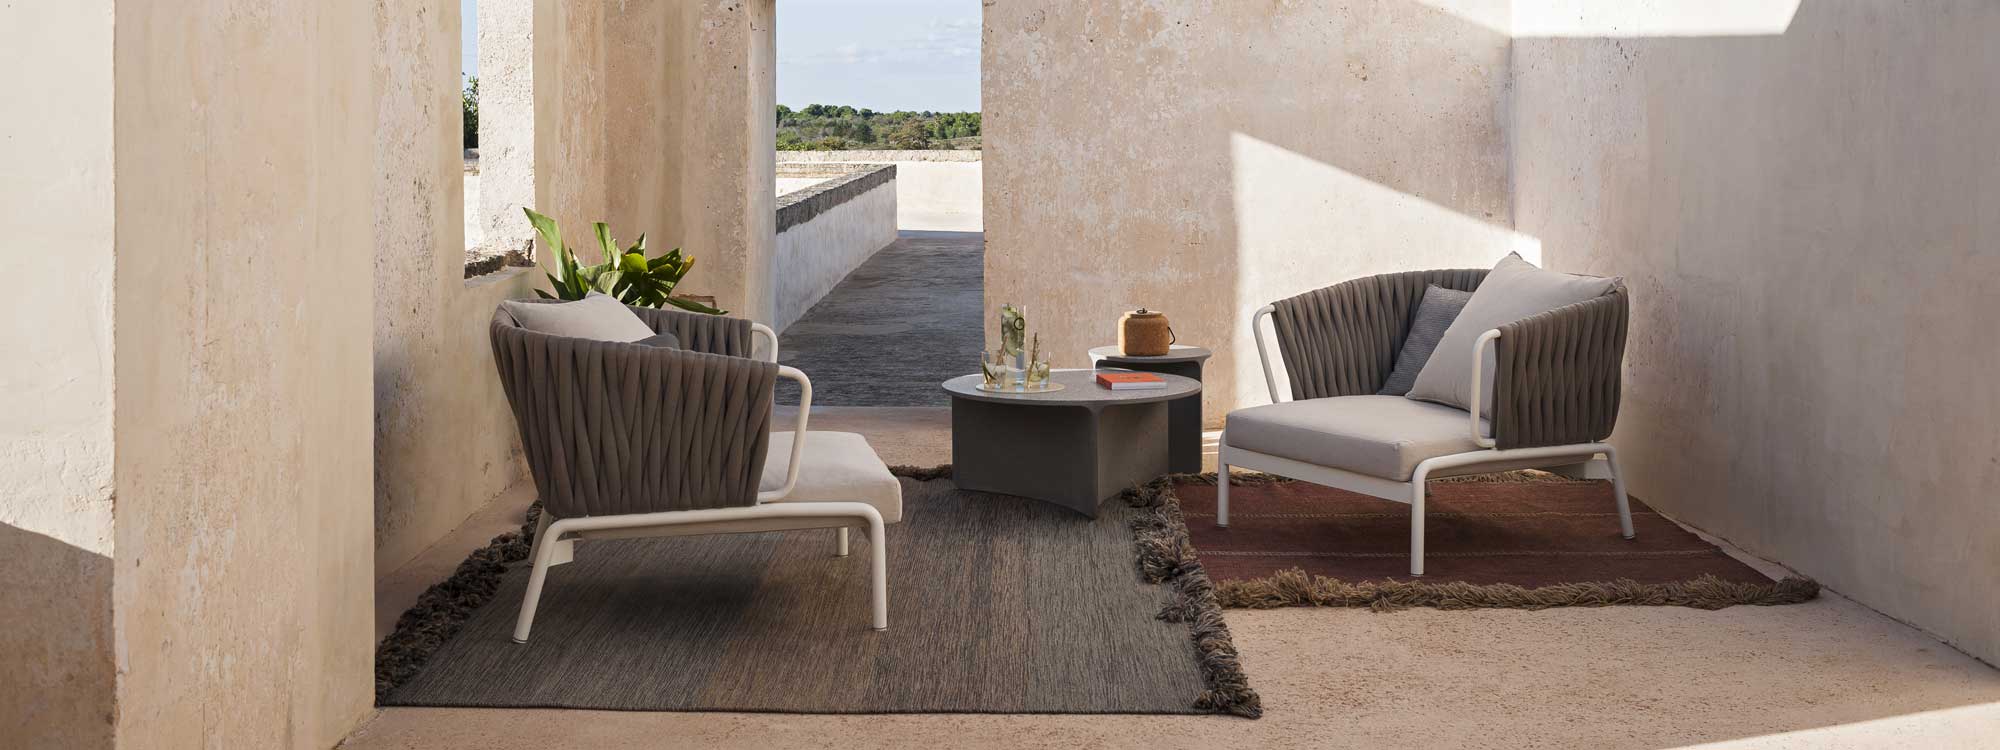 Image of pair of RODA Spool lounge chairs with Sand-coloured padded belt backs and taupe seat cushions together with Aspic low table